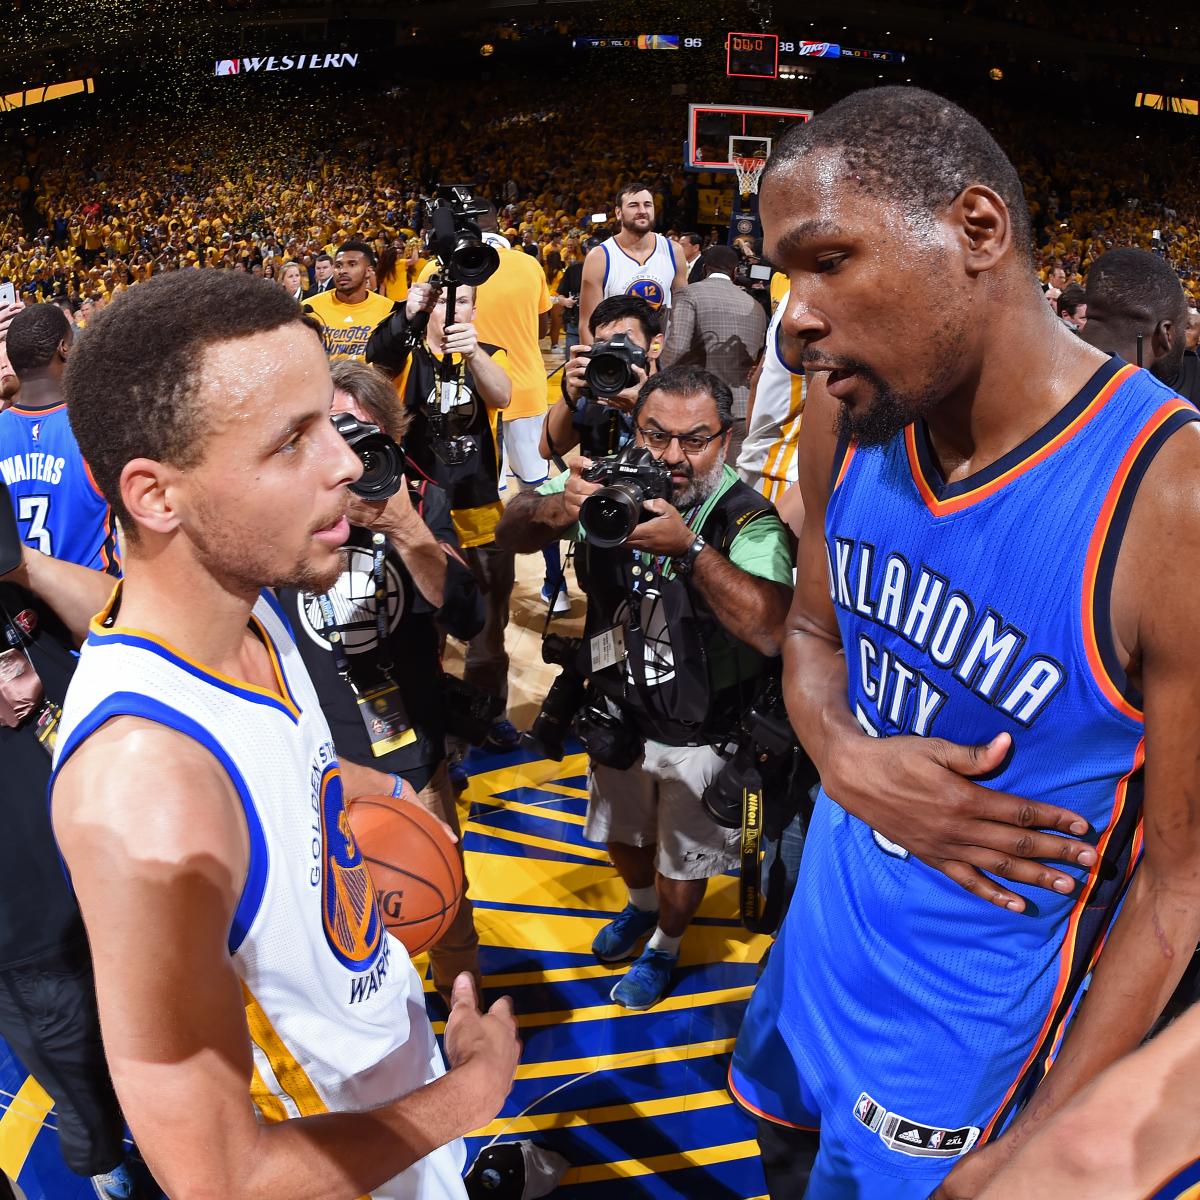 Bleacher Report - Kevin Durant and Russell Westbrook could reportedly join  up as teammates on the Lakers in 2017 if KD leaves for LA this summer.  More